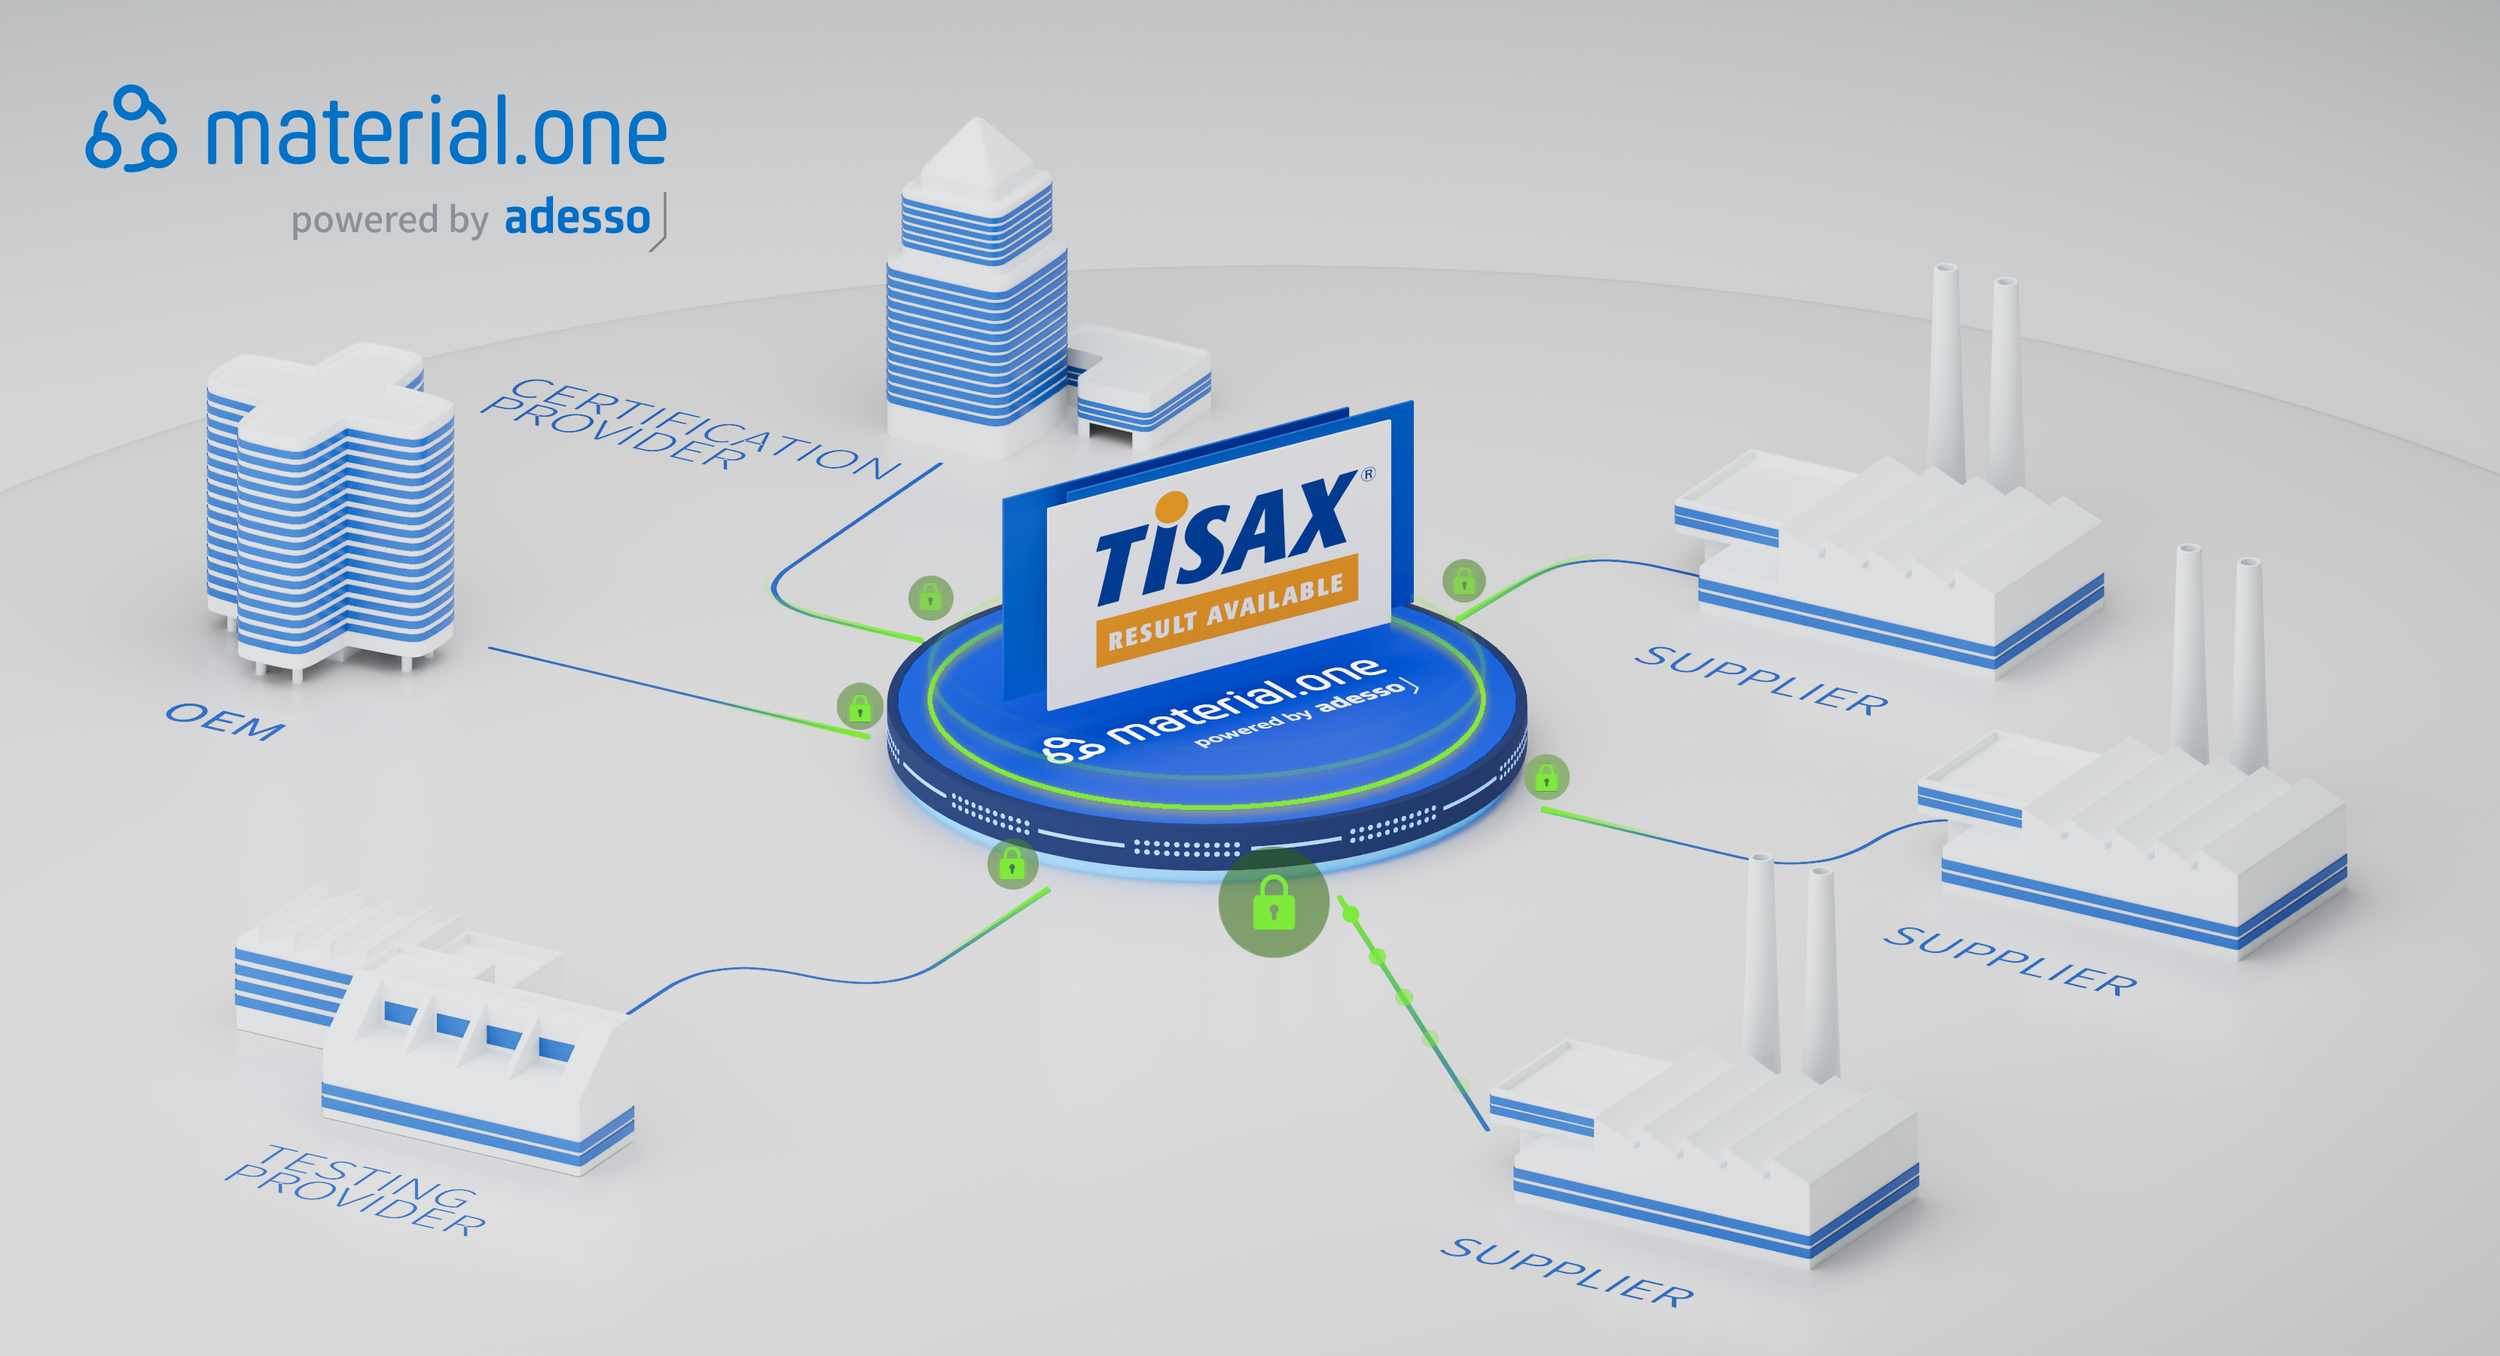 Secure Industry Cloud Platform - material.one passed its three year re-certified for the TISAX standard